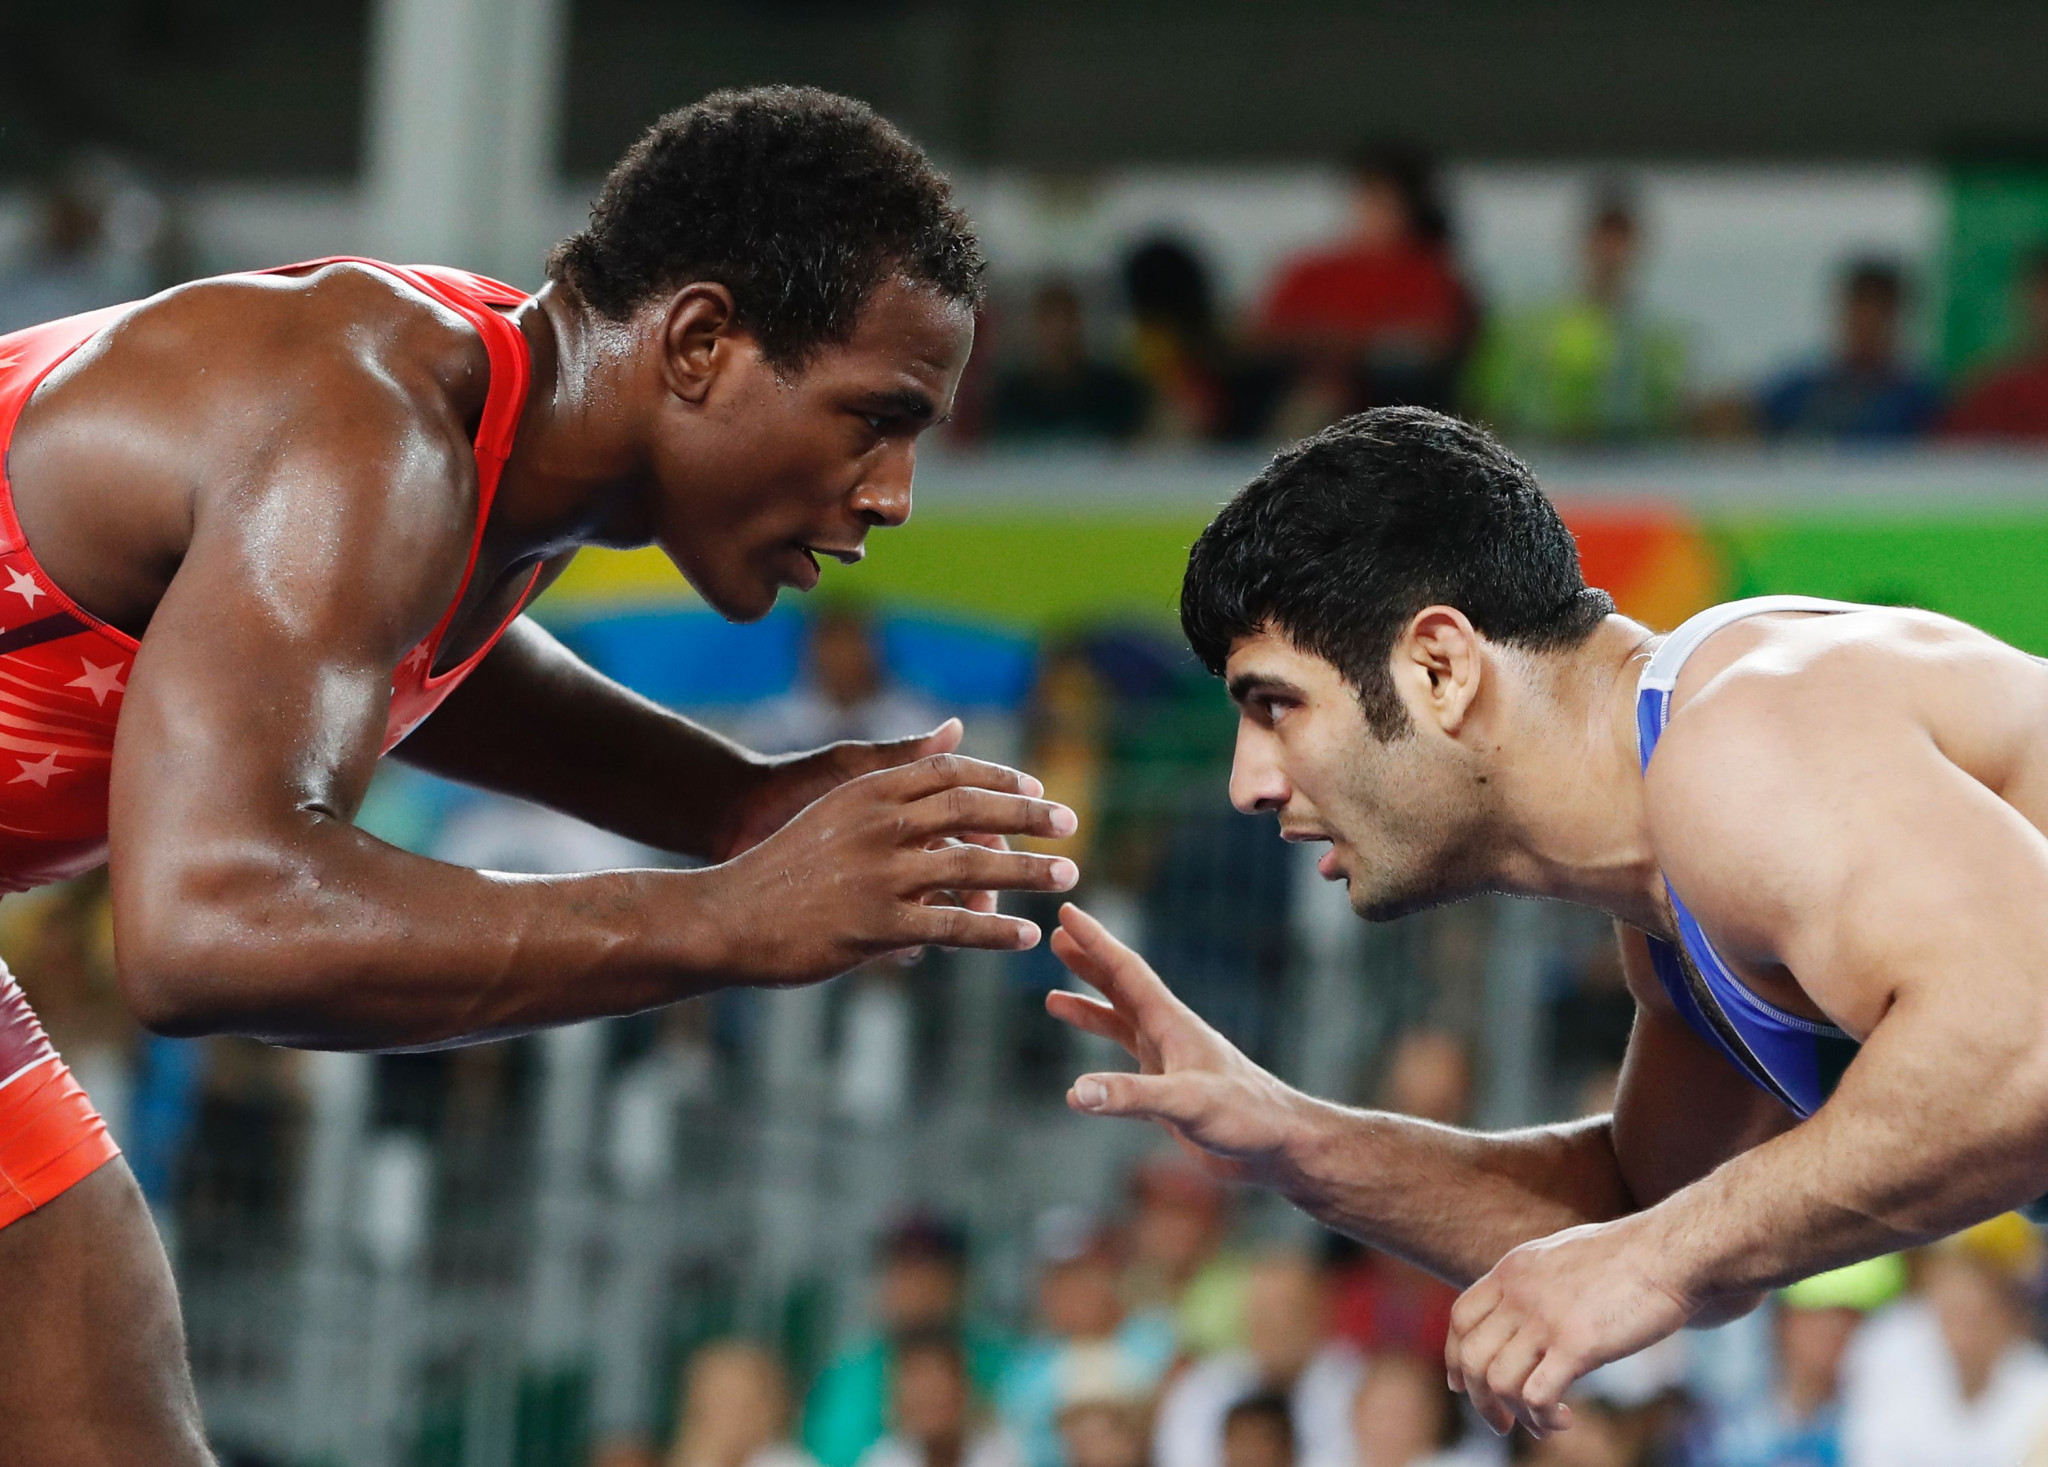 United World Wrestling banned Alireza Karimi, right, after he refused to compete against an Israeli opponent ©Getty Images